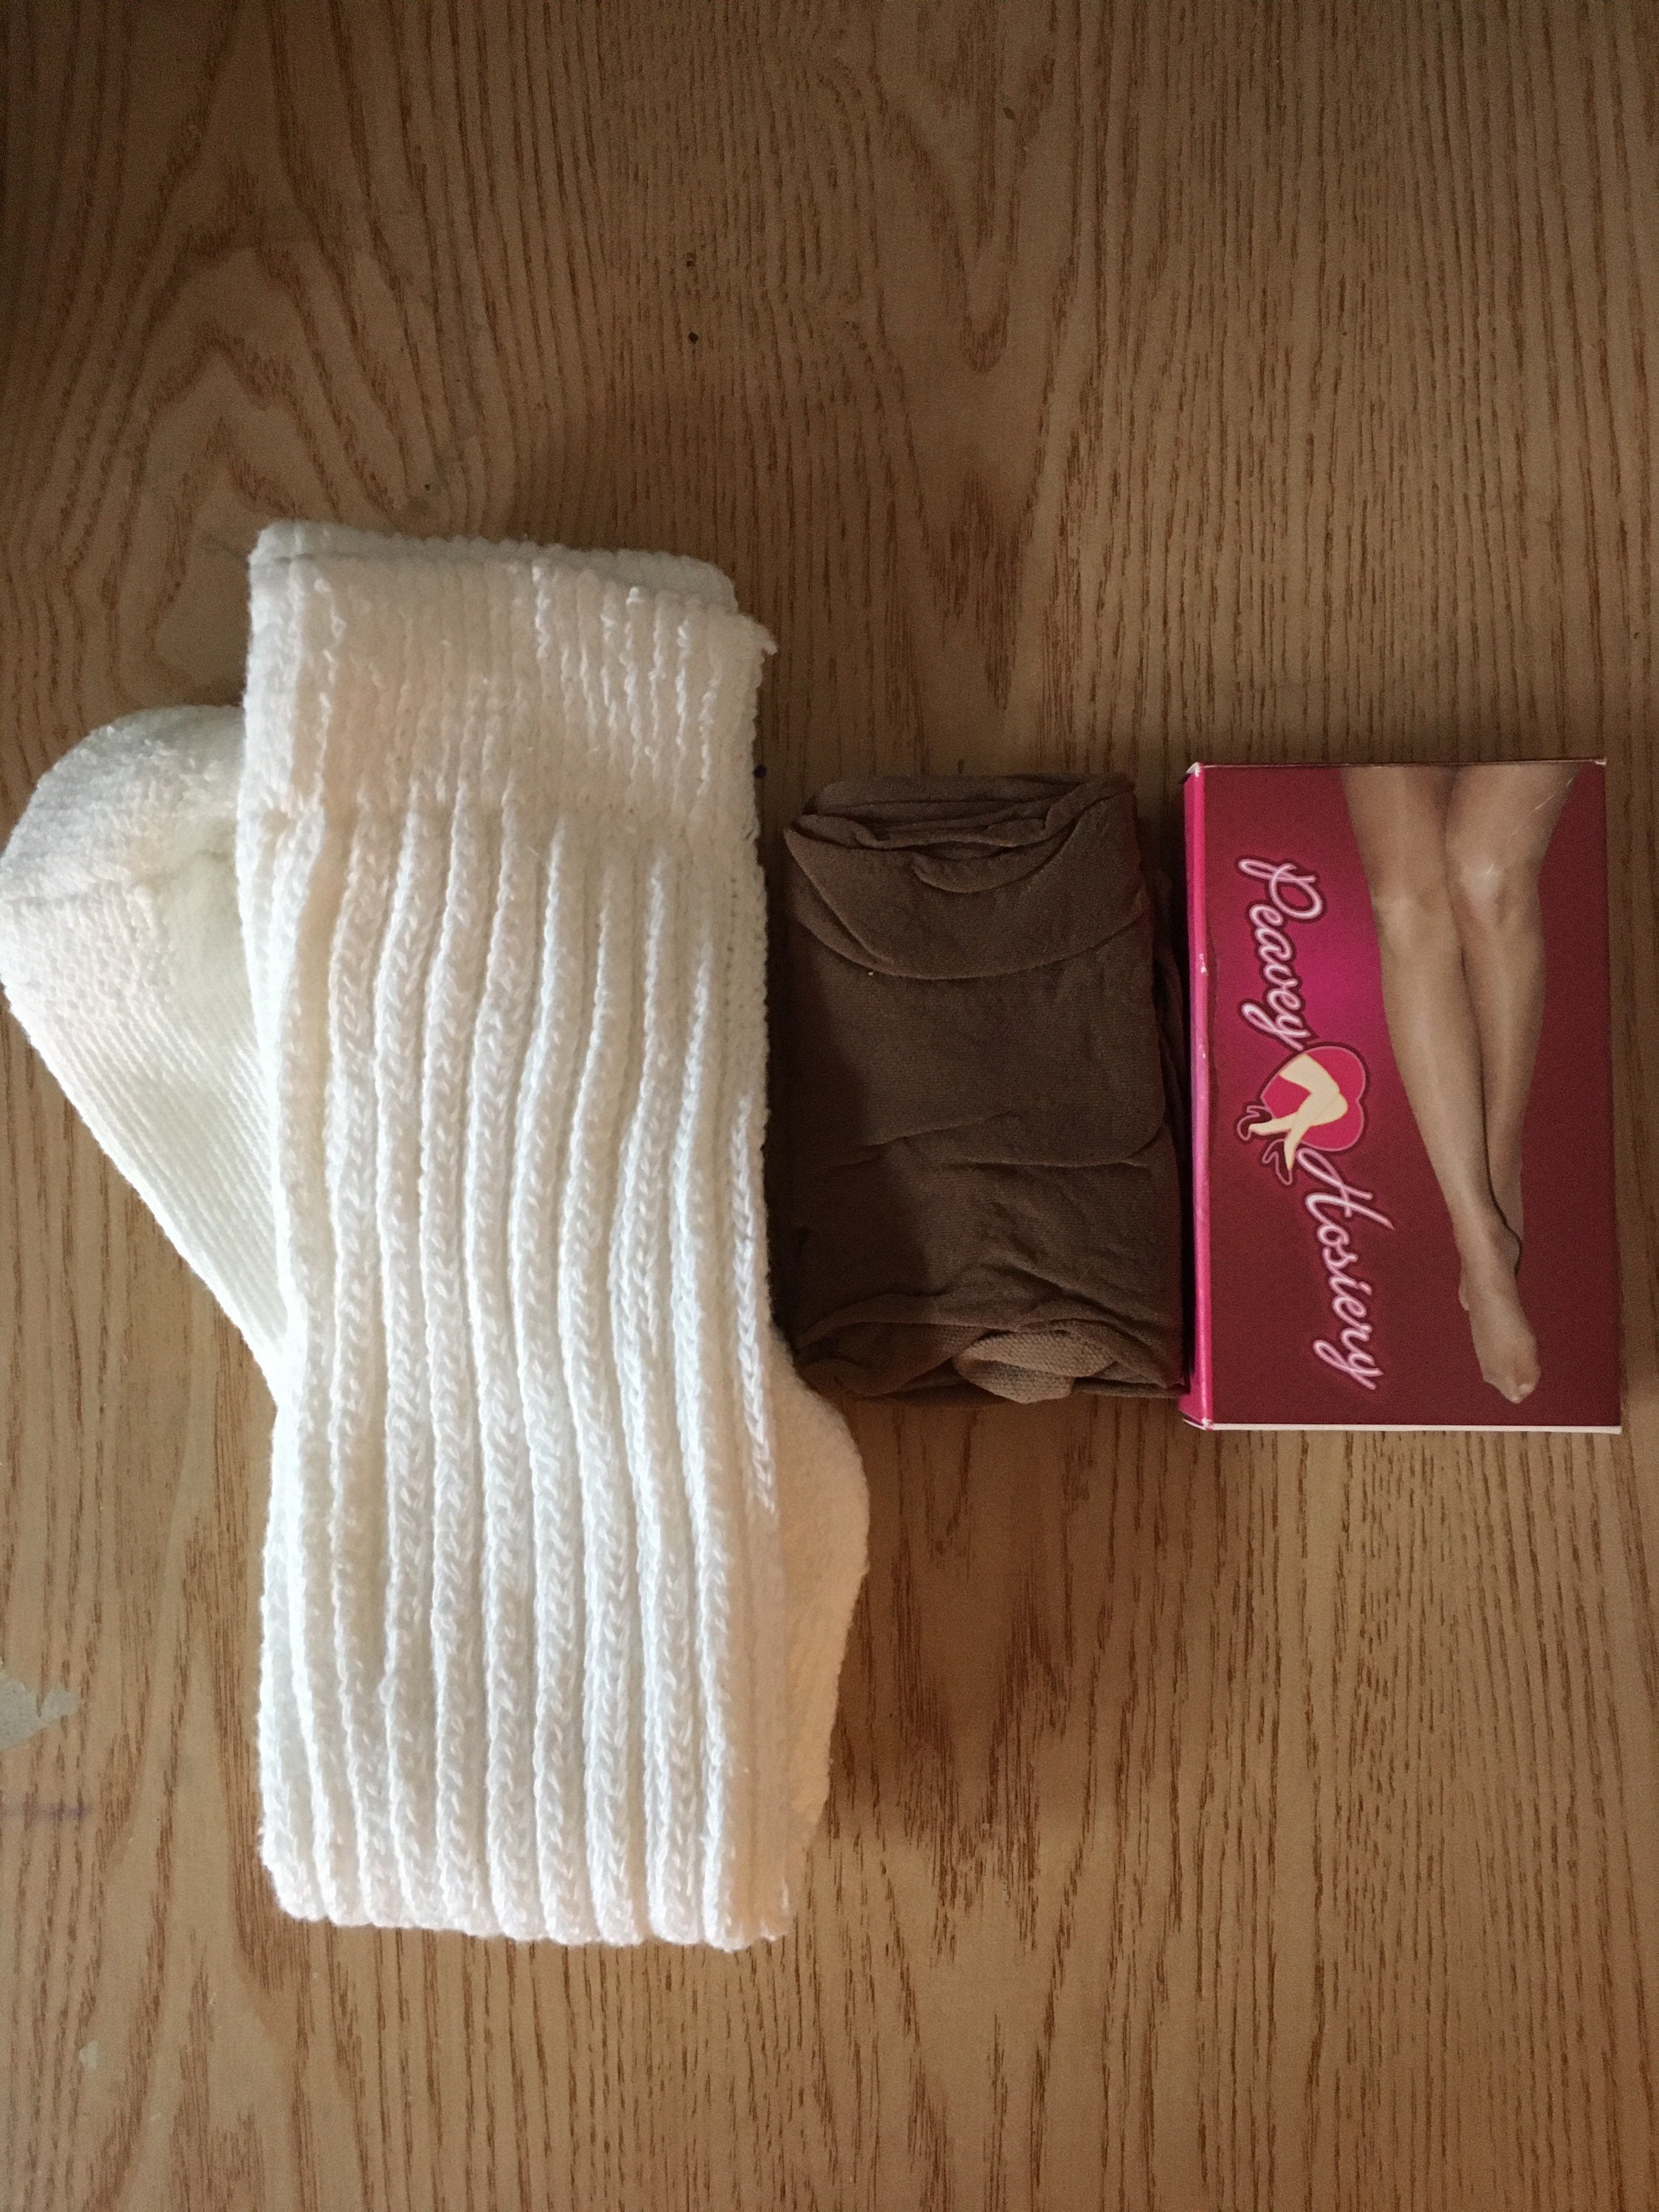 Vintage Pair of Slenderalls, Underalls, Pantyhose & Control Top Panties All  in One, Size A-B, Sandalfoot, Suntan Legs, Beige Panty -  Canada